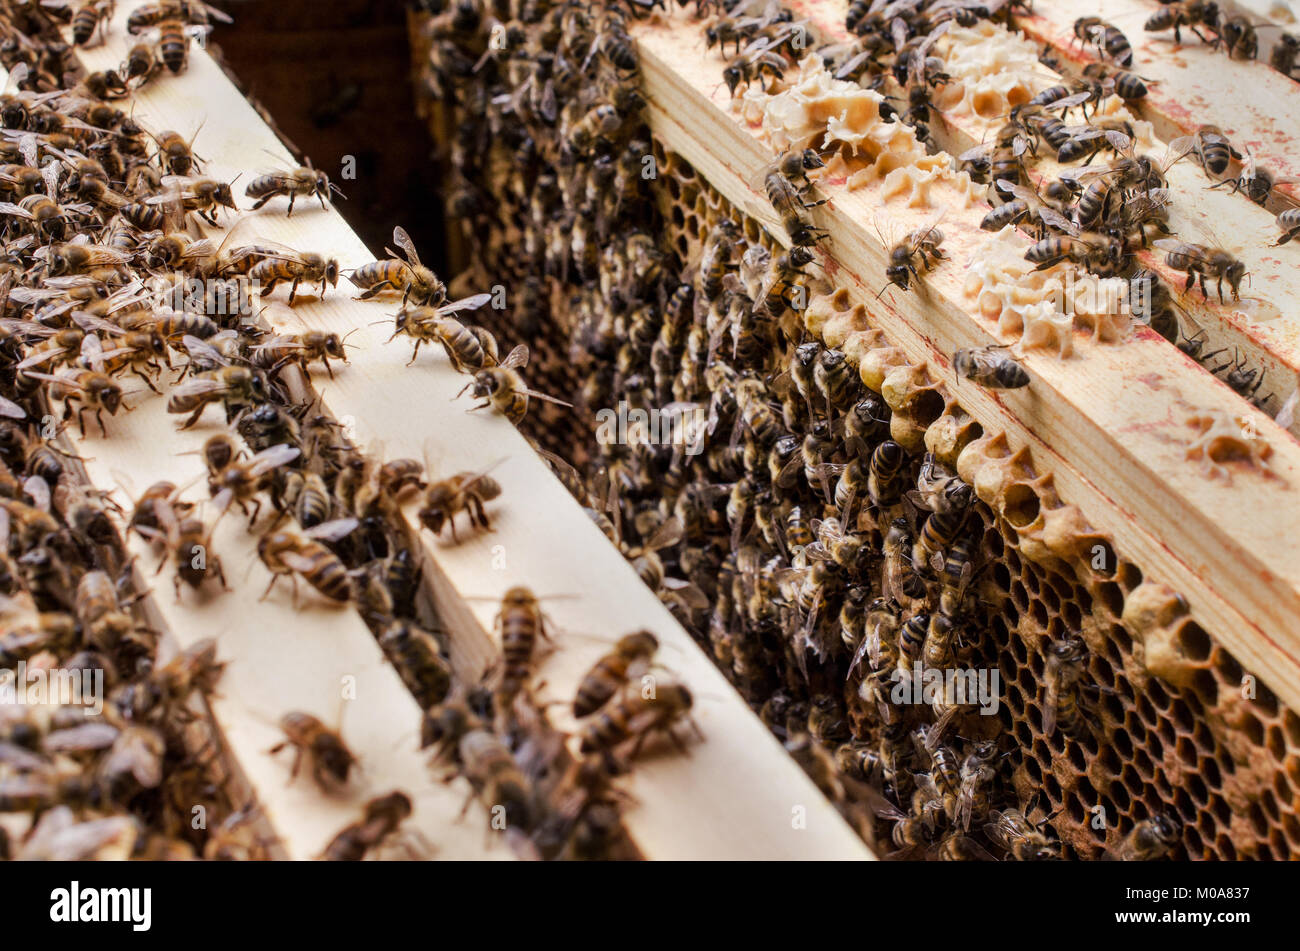 Colony of honeybee workers in an open bee hive, Oxfordshire, UK Stock Photo